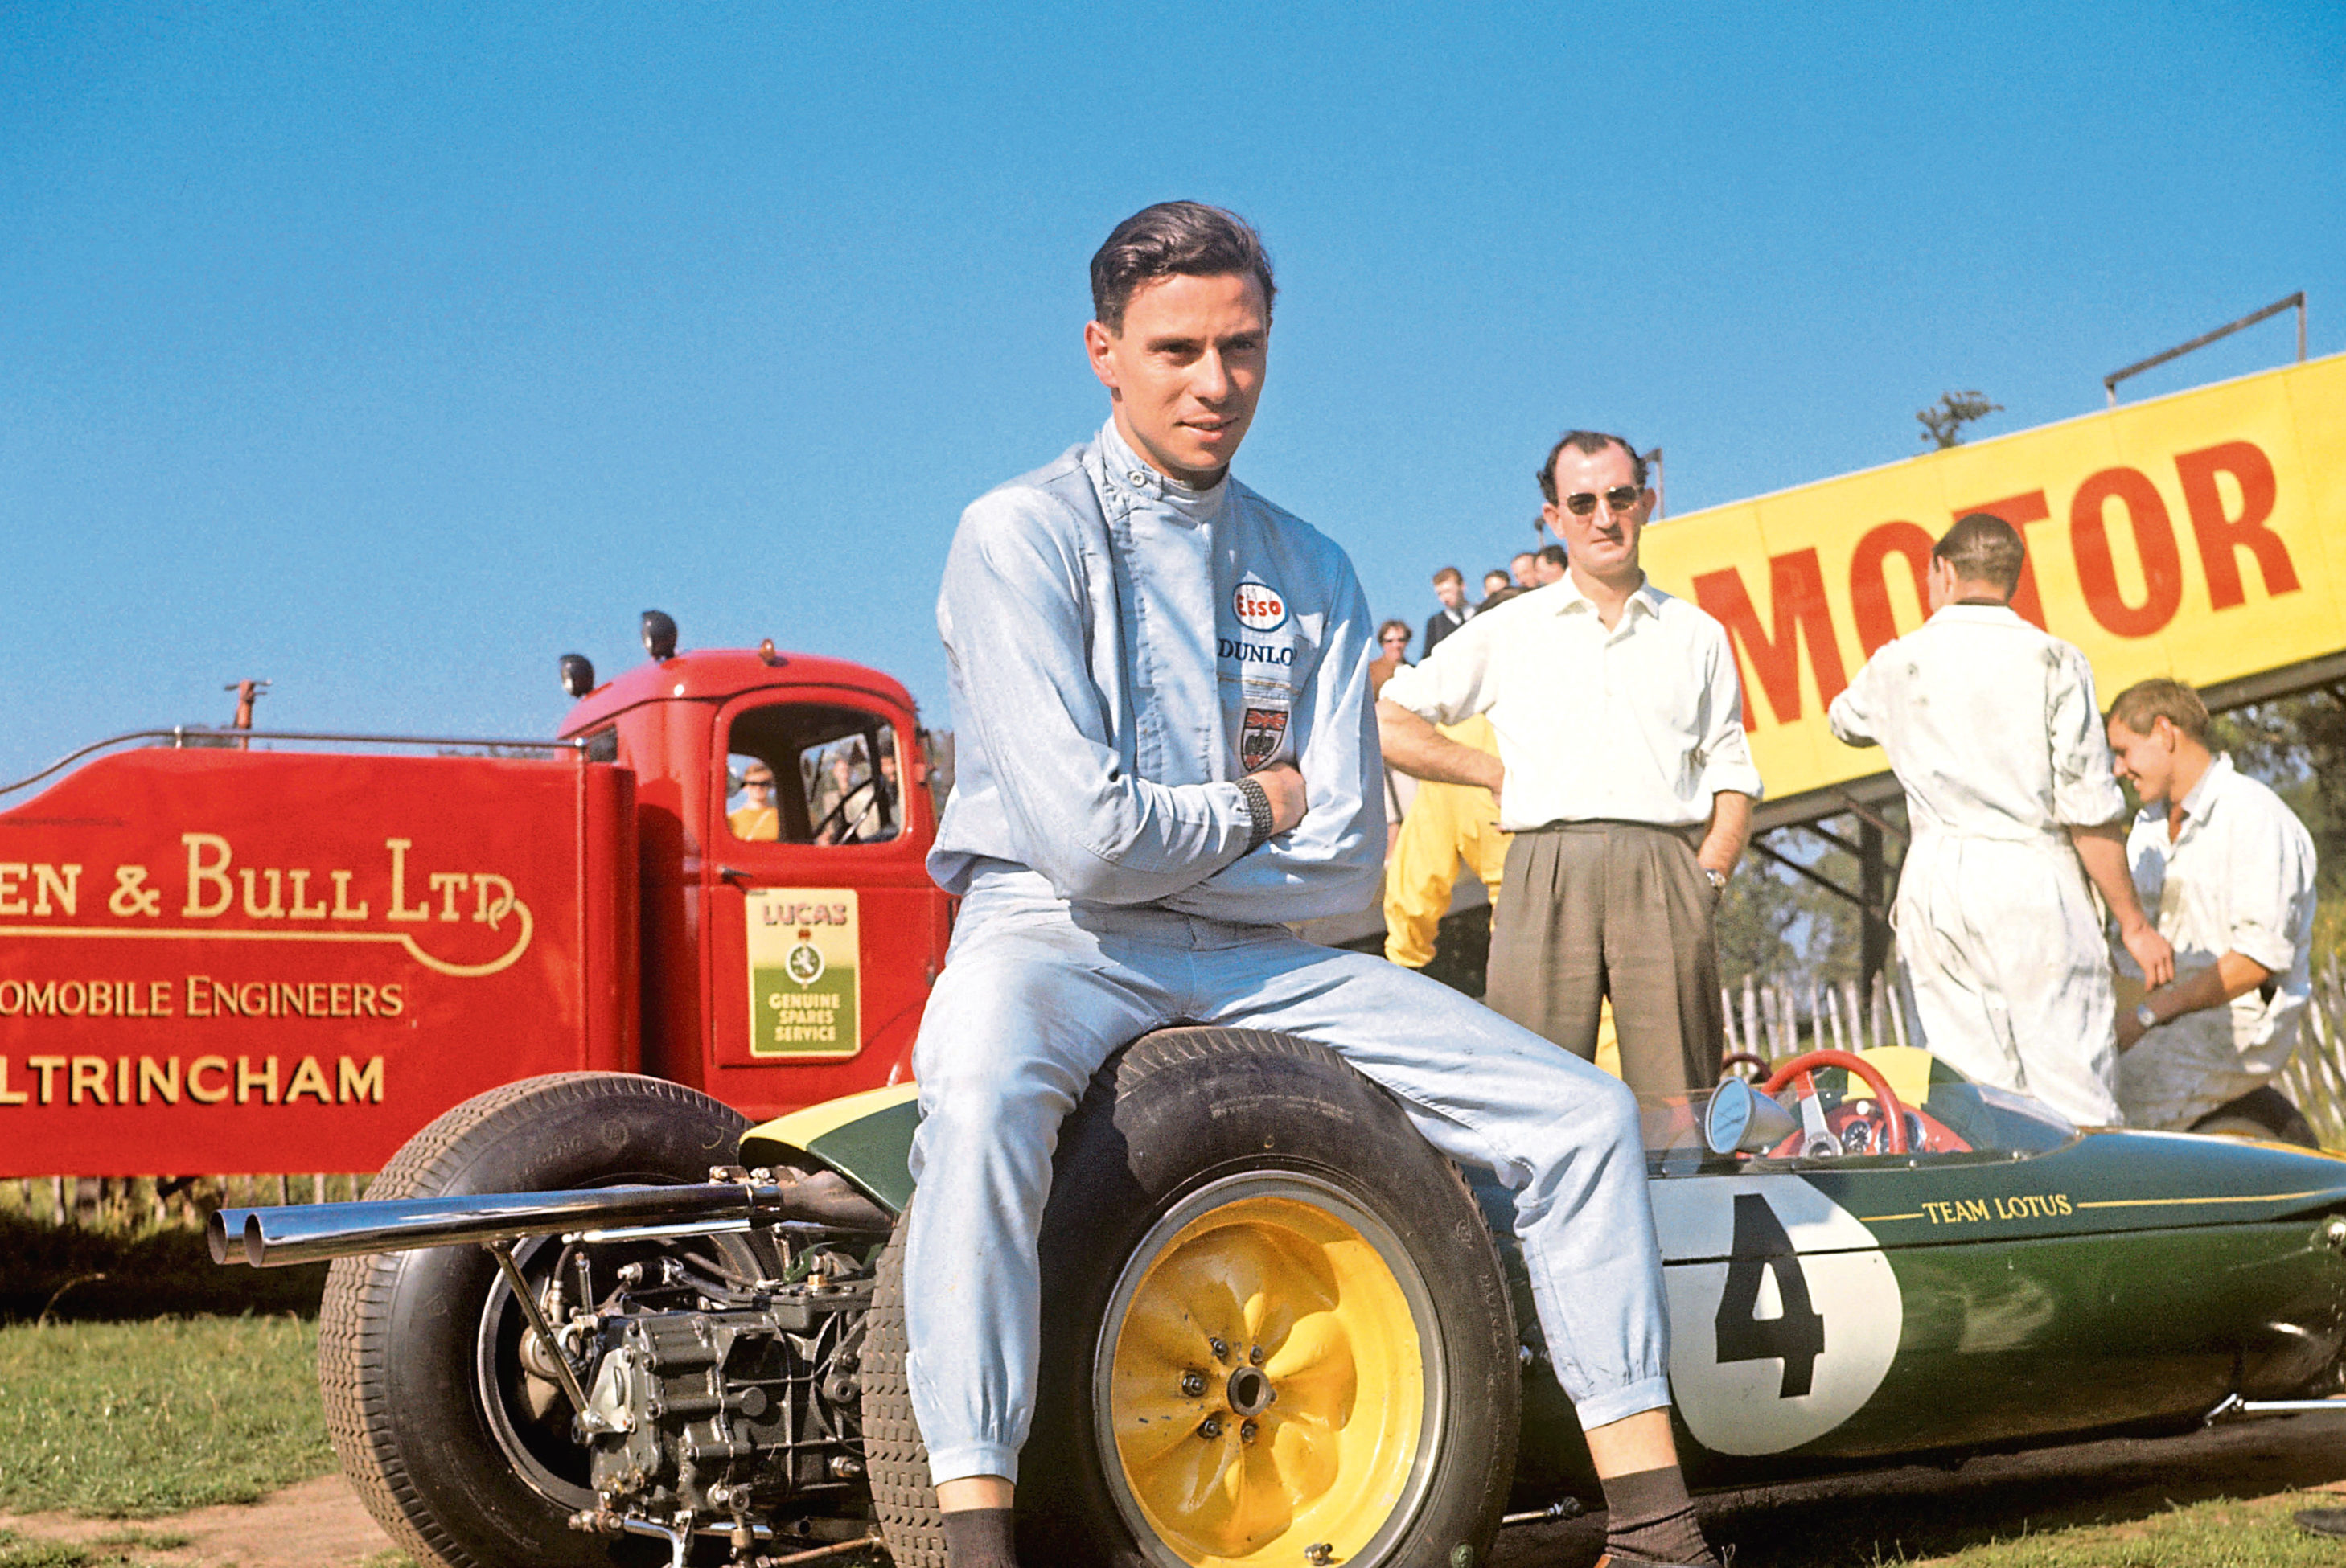 Jim Clark won two Formula One world championships and was regarded as the best driver in the world